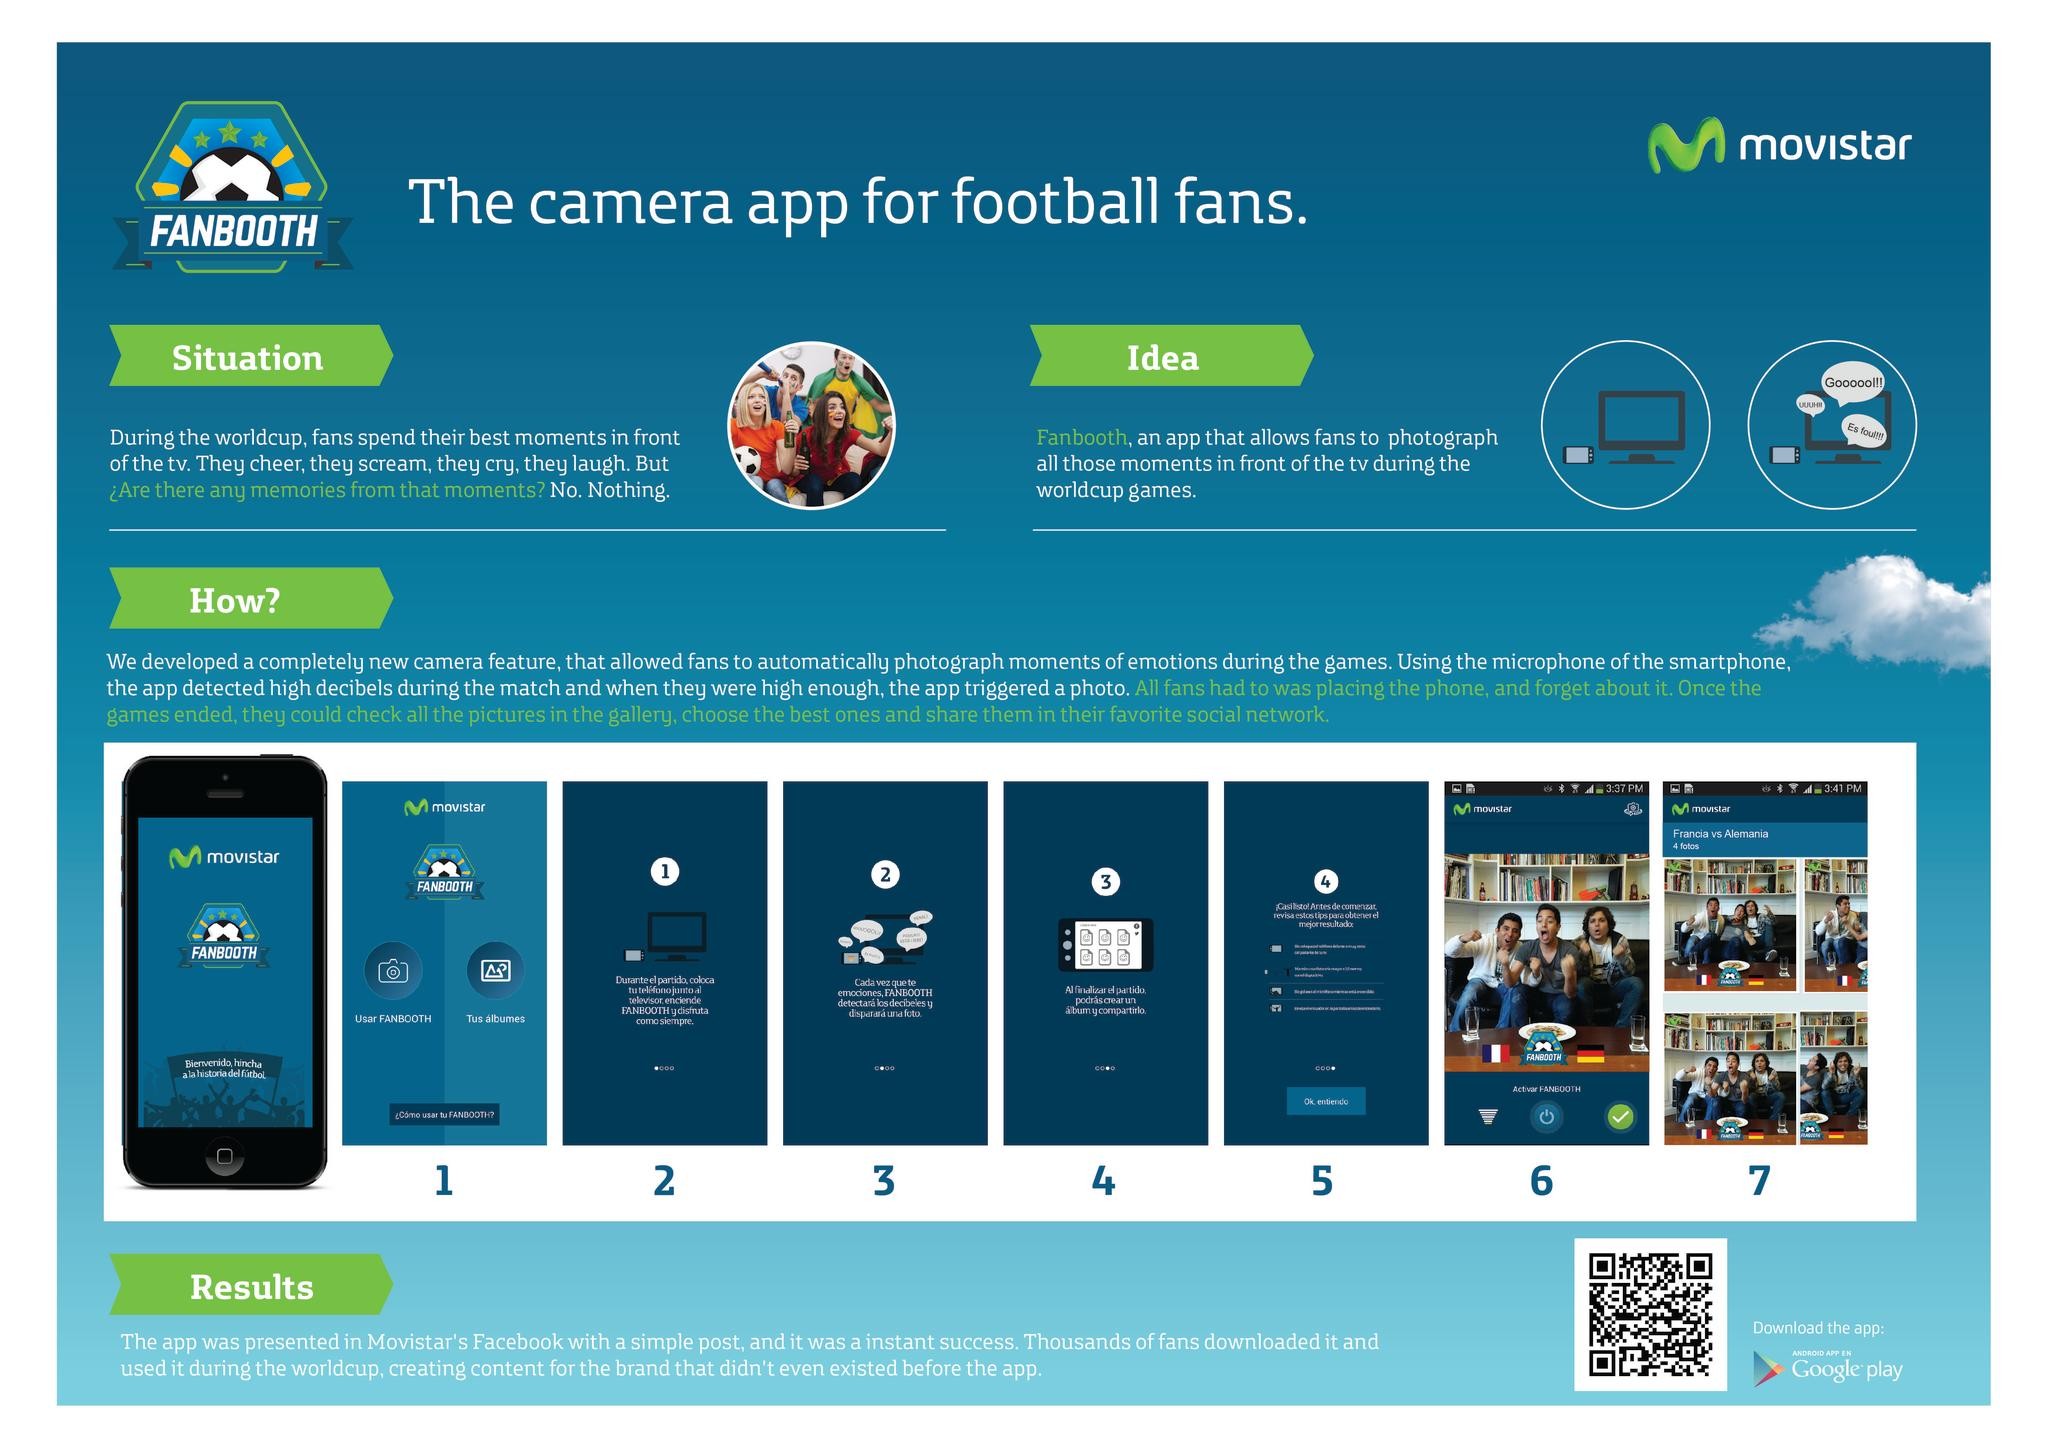 FAN BOOTH, THE ULTIMATE APP FOR FOOTBALL FANS